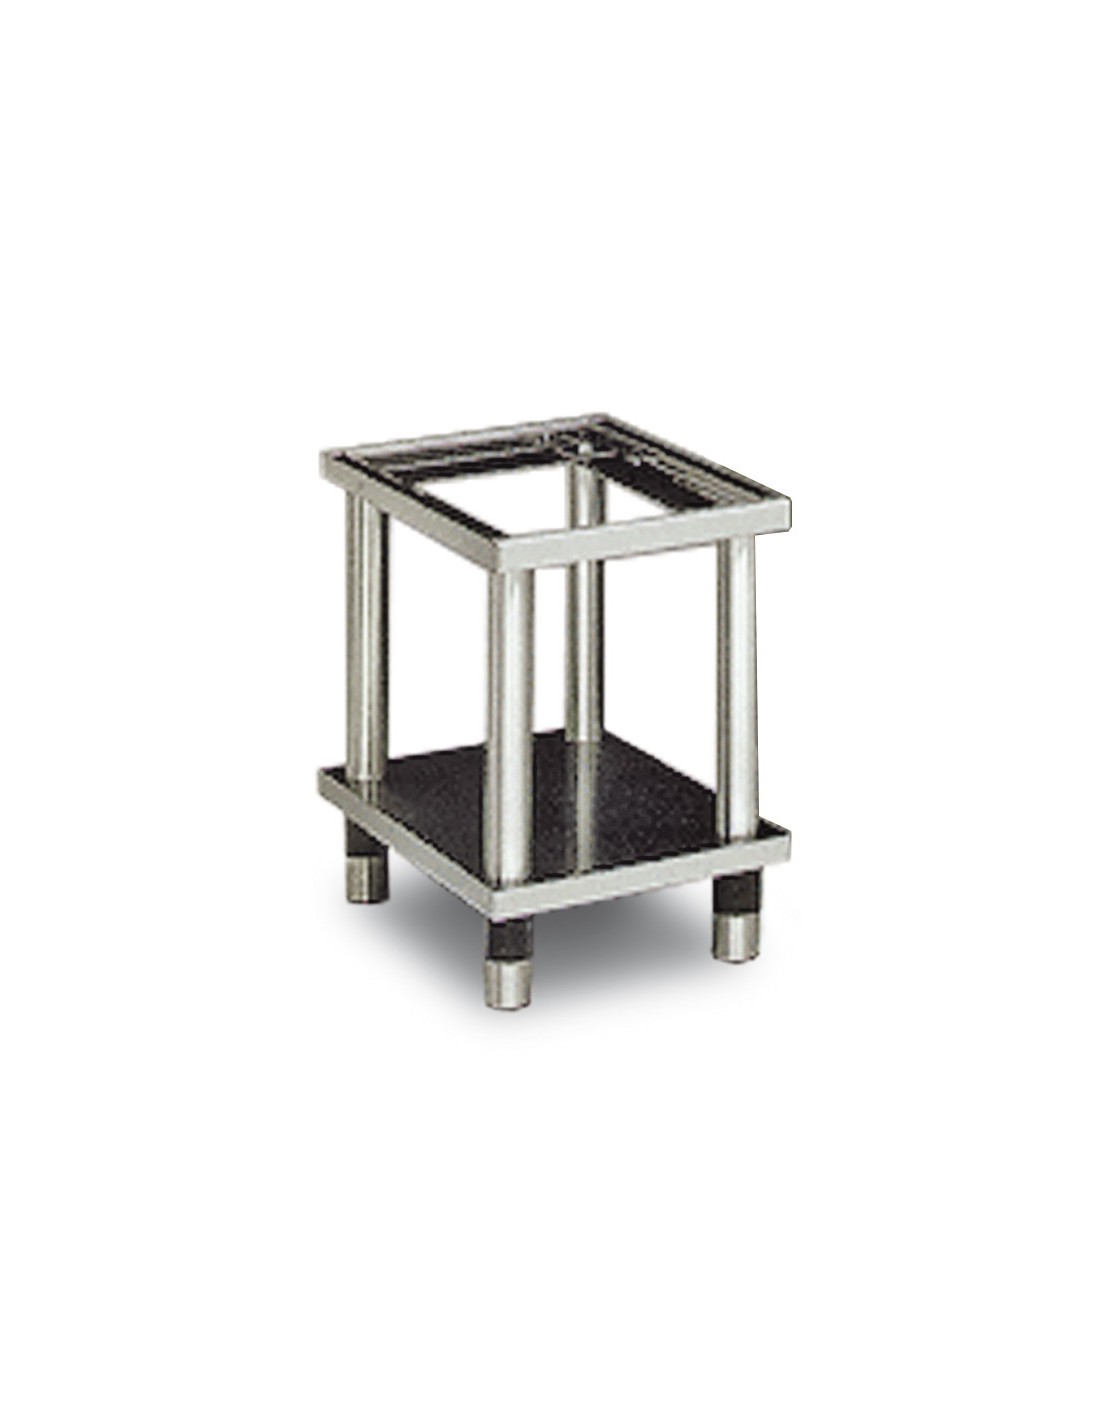 Base stand - Dimensions cm 40 x 48.5 x 57 h